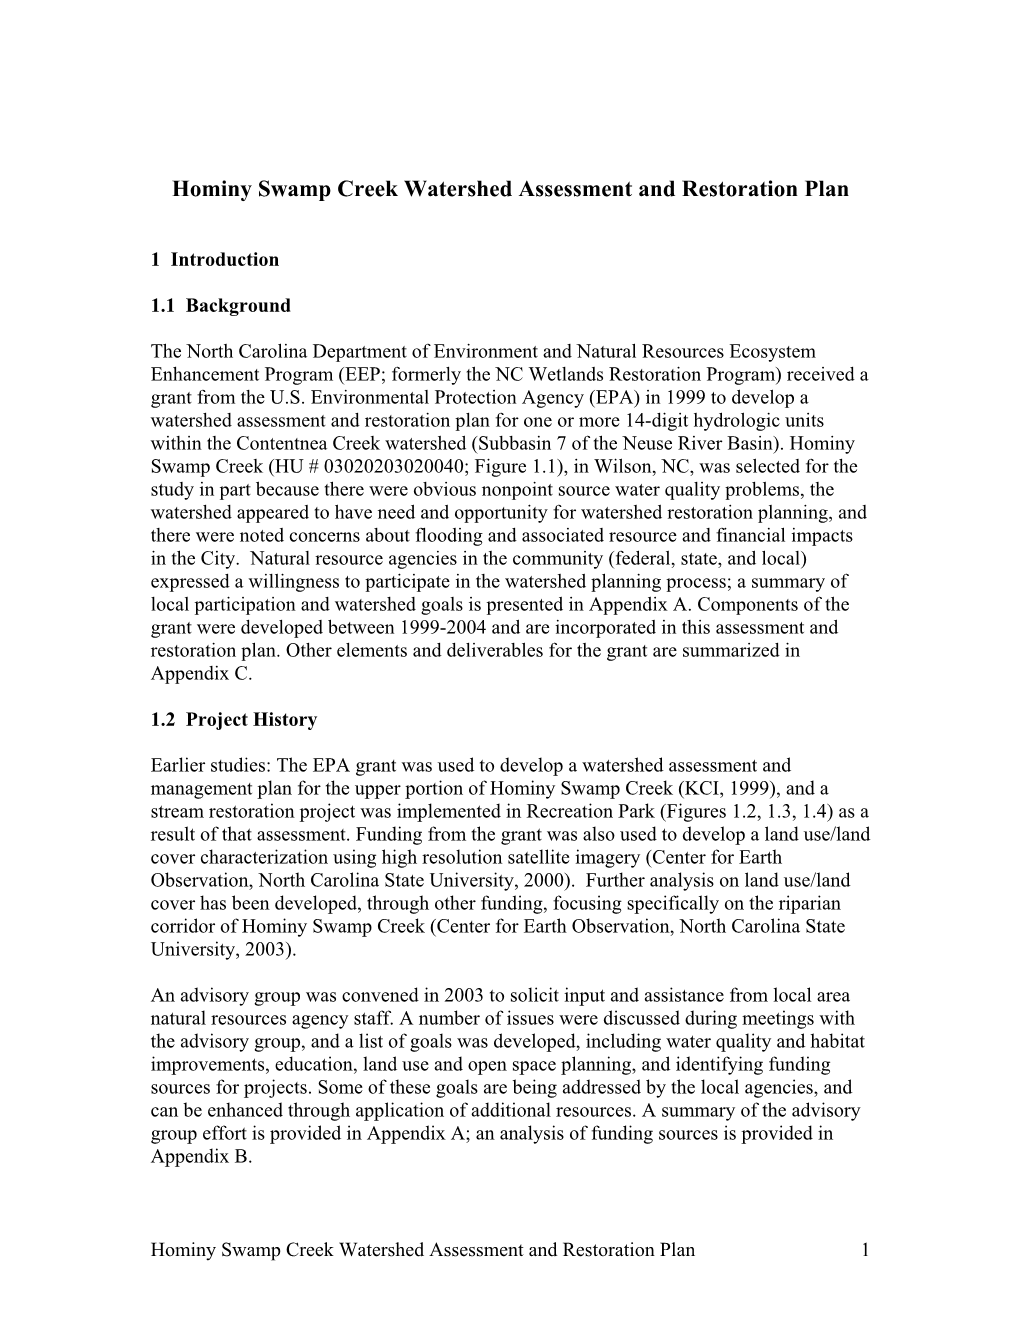 Hominy Swamp Creek Watershed Assessment and Restoration Plan